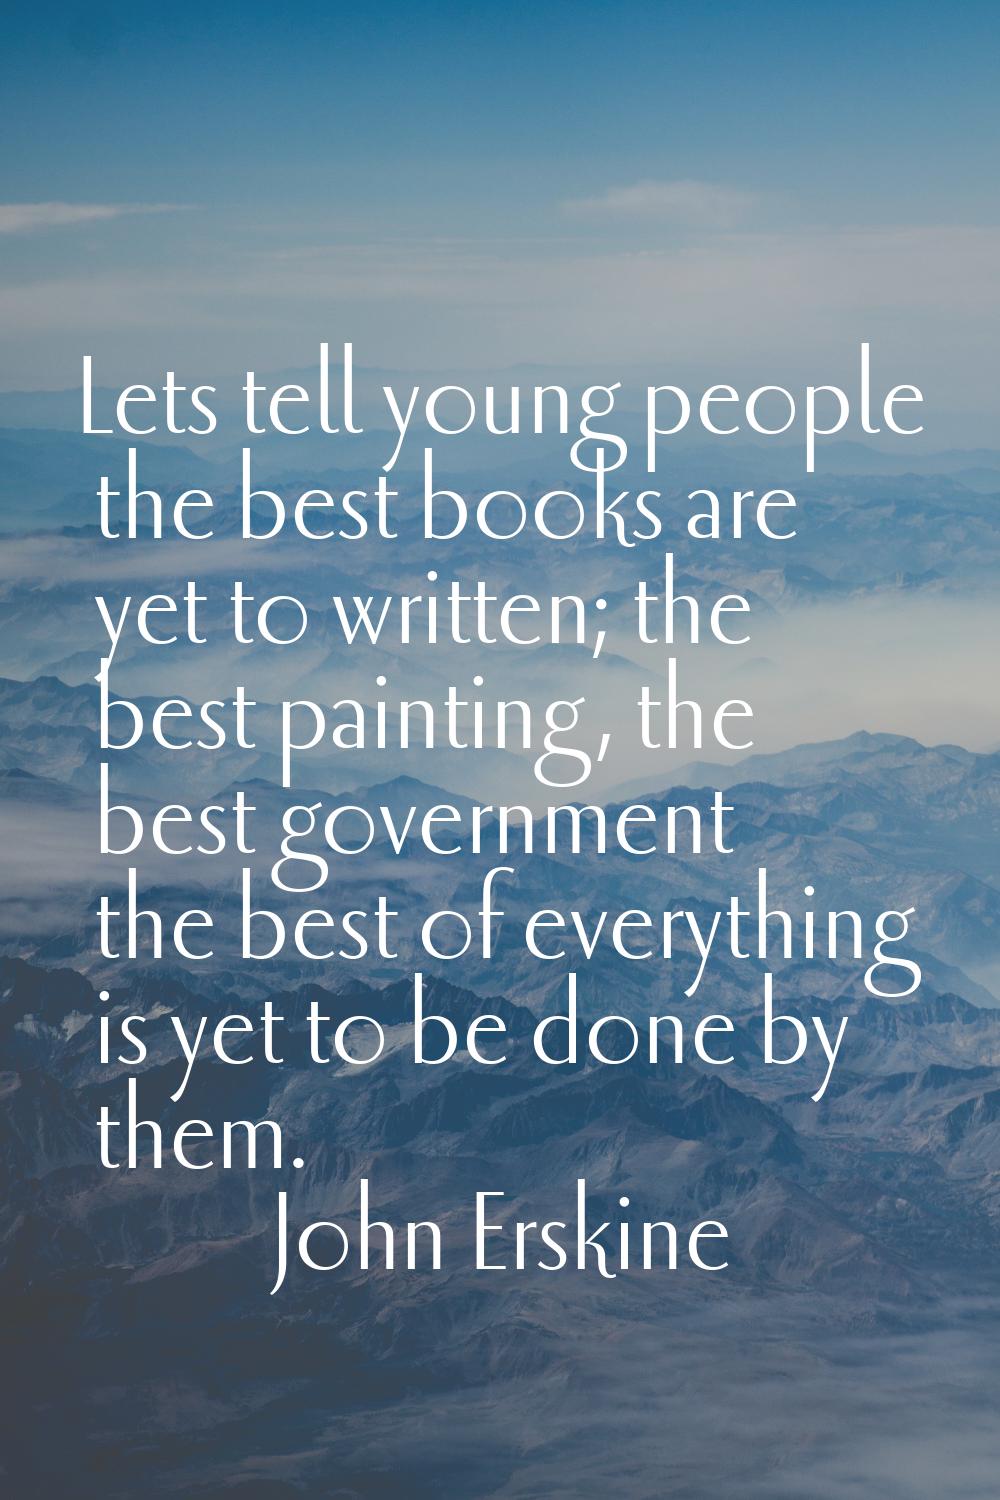 Lets tell young people the best books are yet to written; the best painting, the best government th